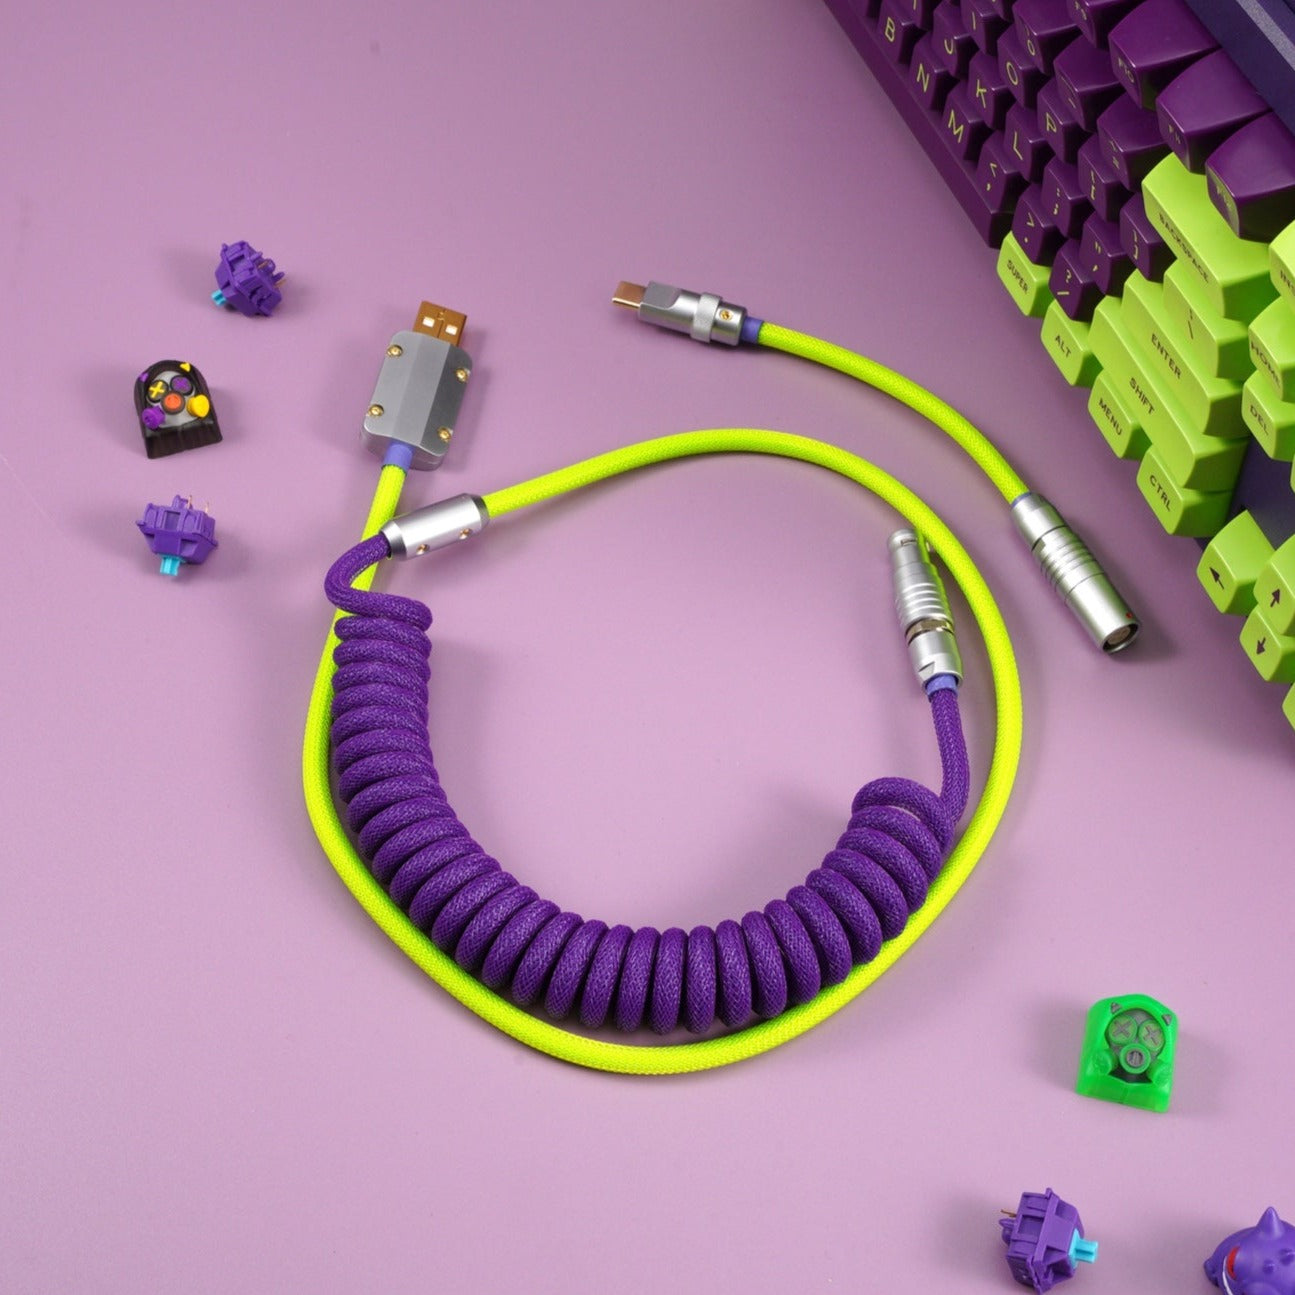 Sleeved Coiled Keyboard Aviator Cable, Lemo Style Connector - Purple/Neon Green